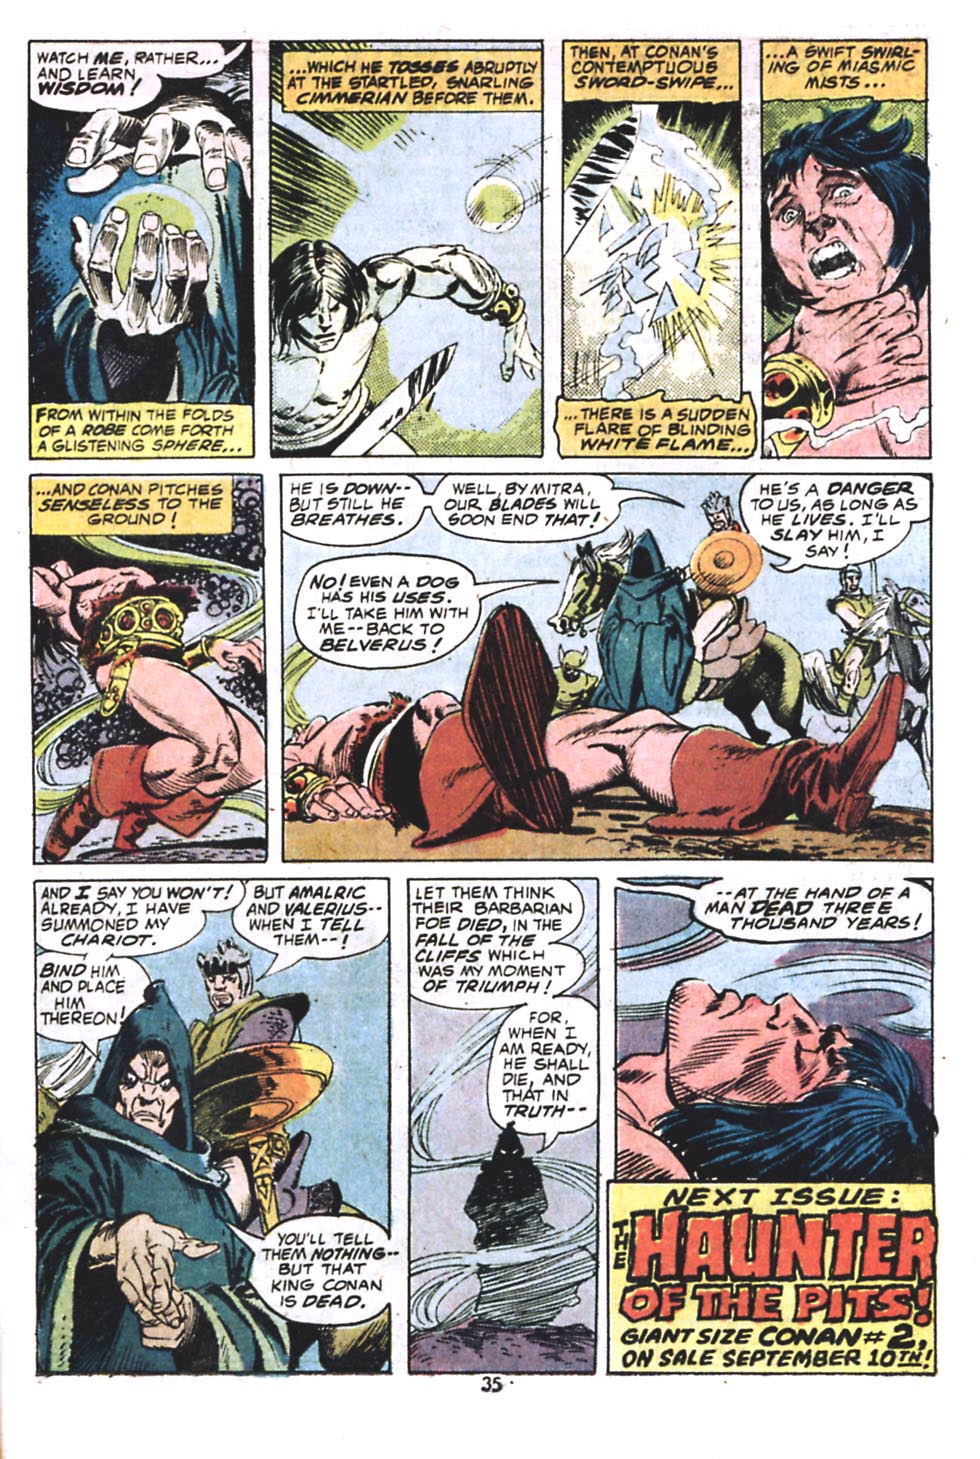 Read online Giant-Size Conan comic -  Issue #1 - 28